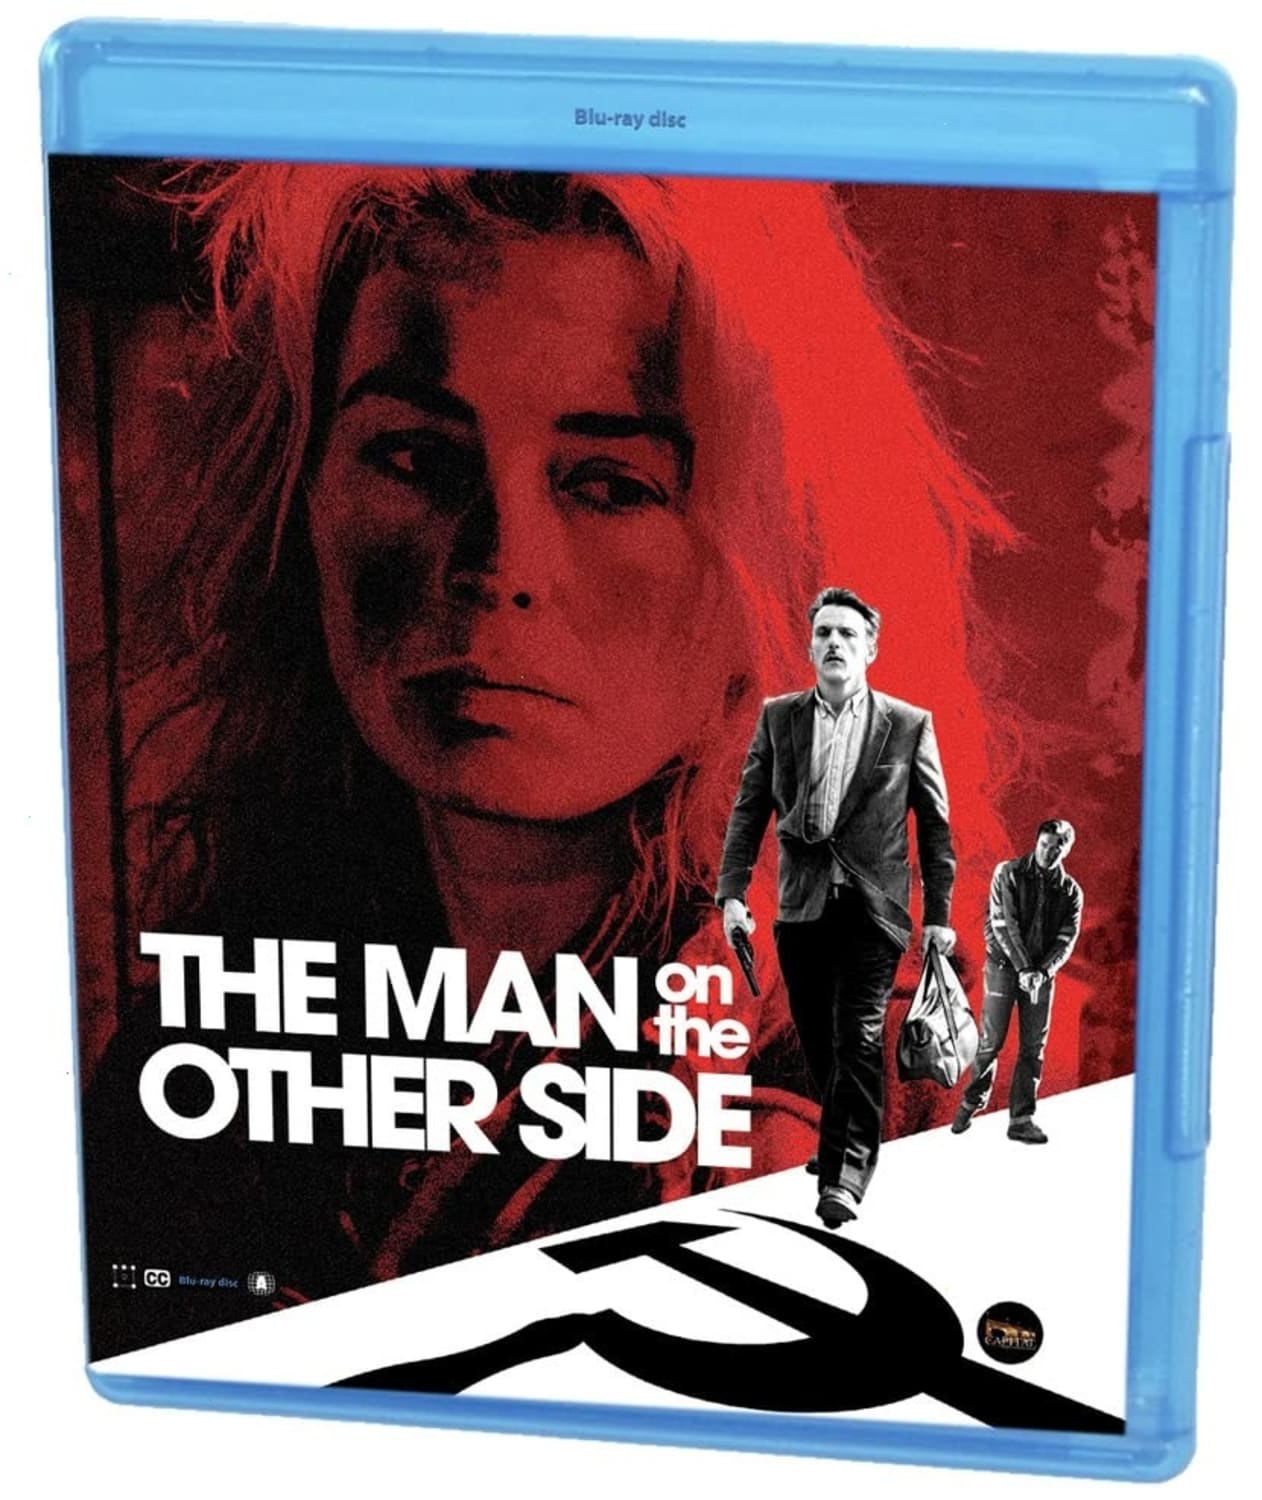 The Man on the Other Side (Blu-ray) on MovieShack